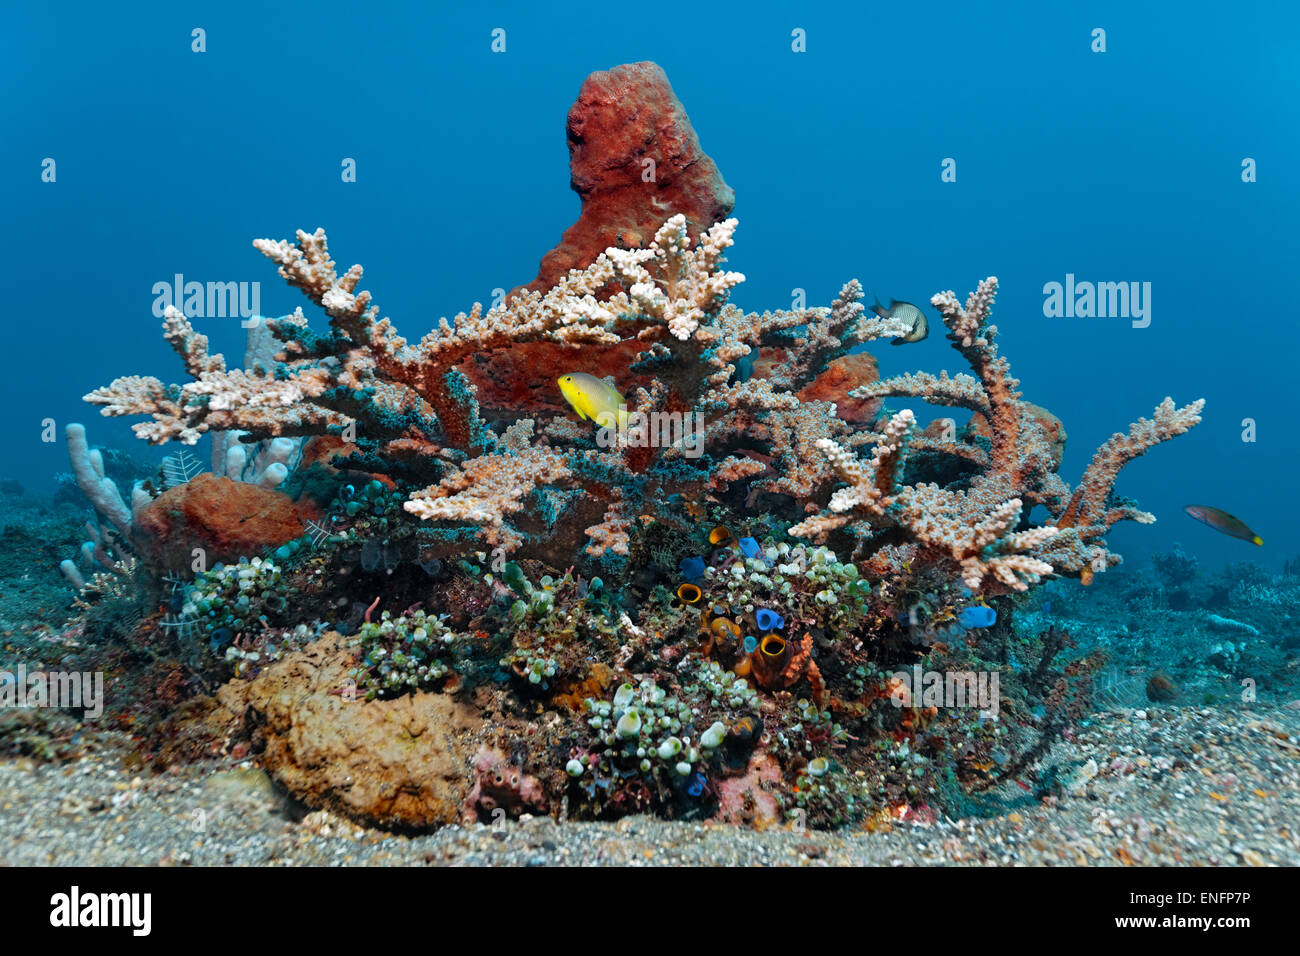 Small coral reef with various corals, sea squirts, sponges and fish, Bali Stock Photo